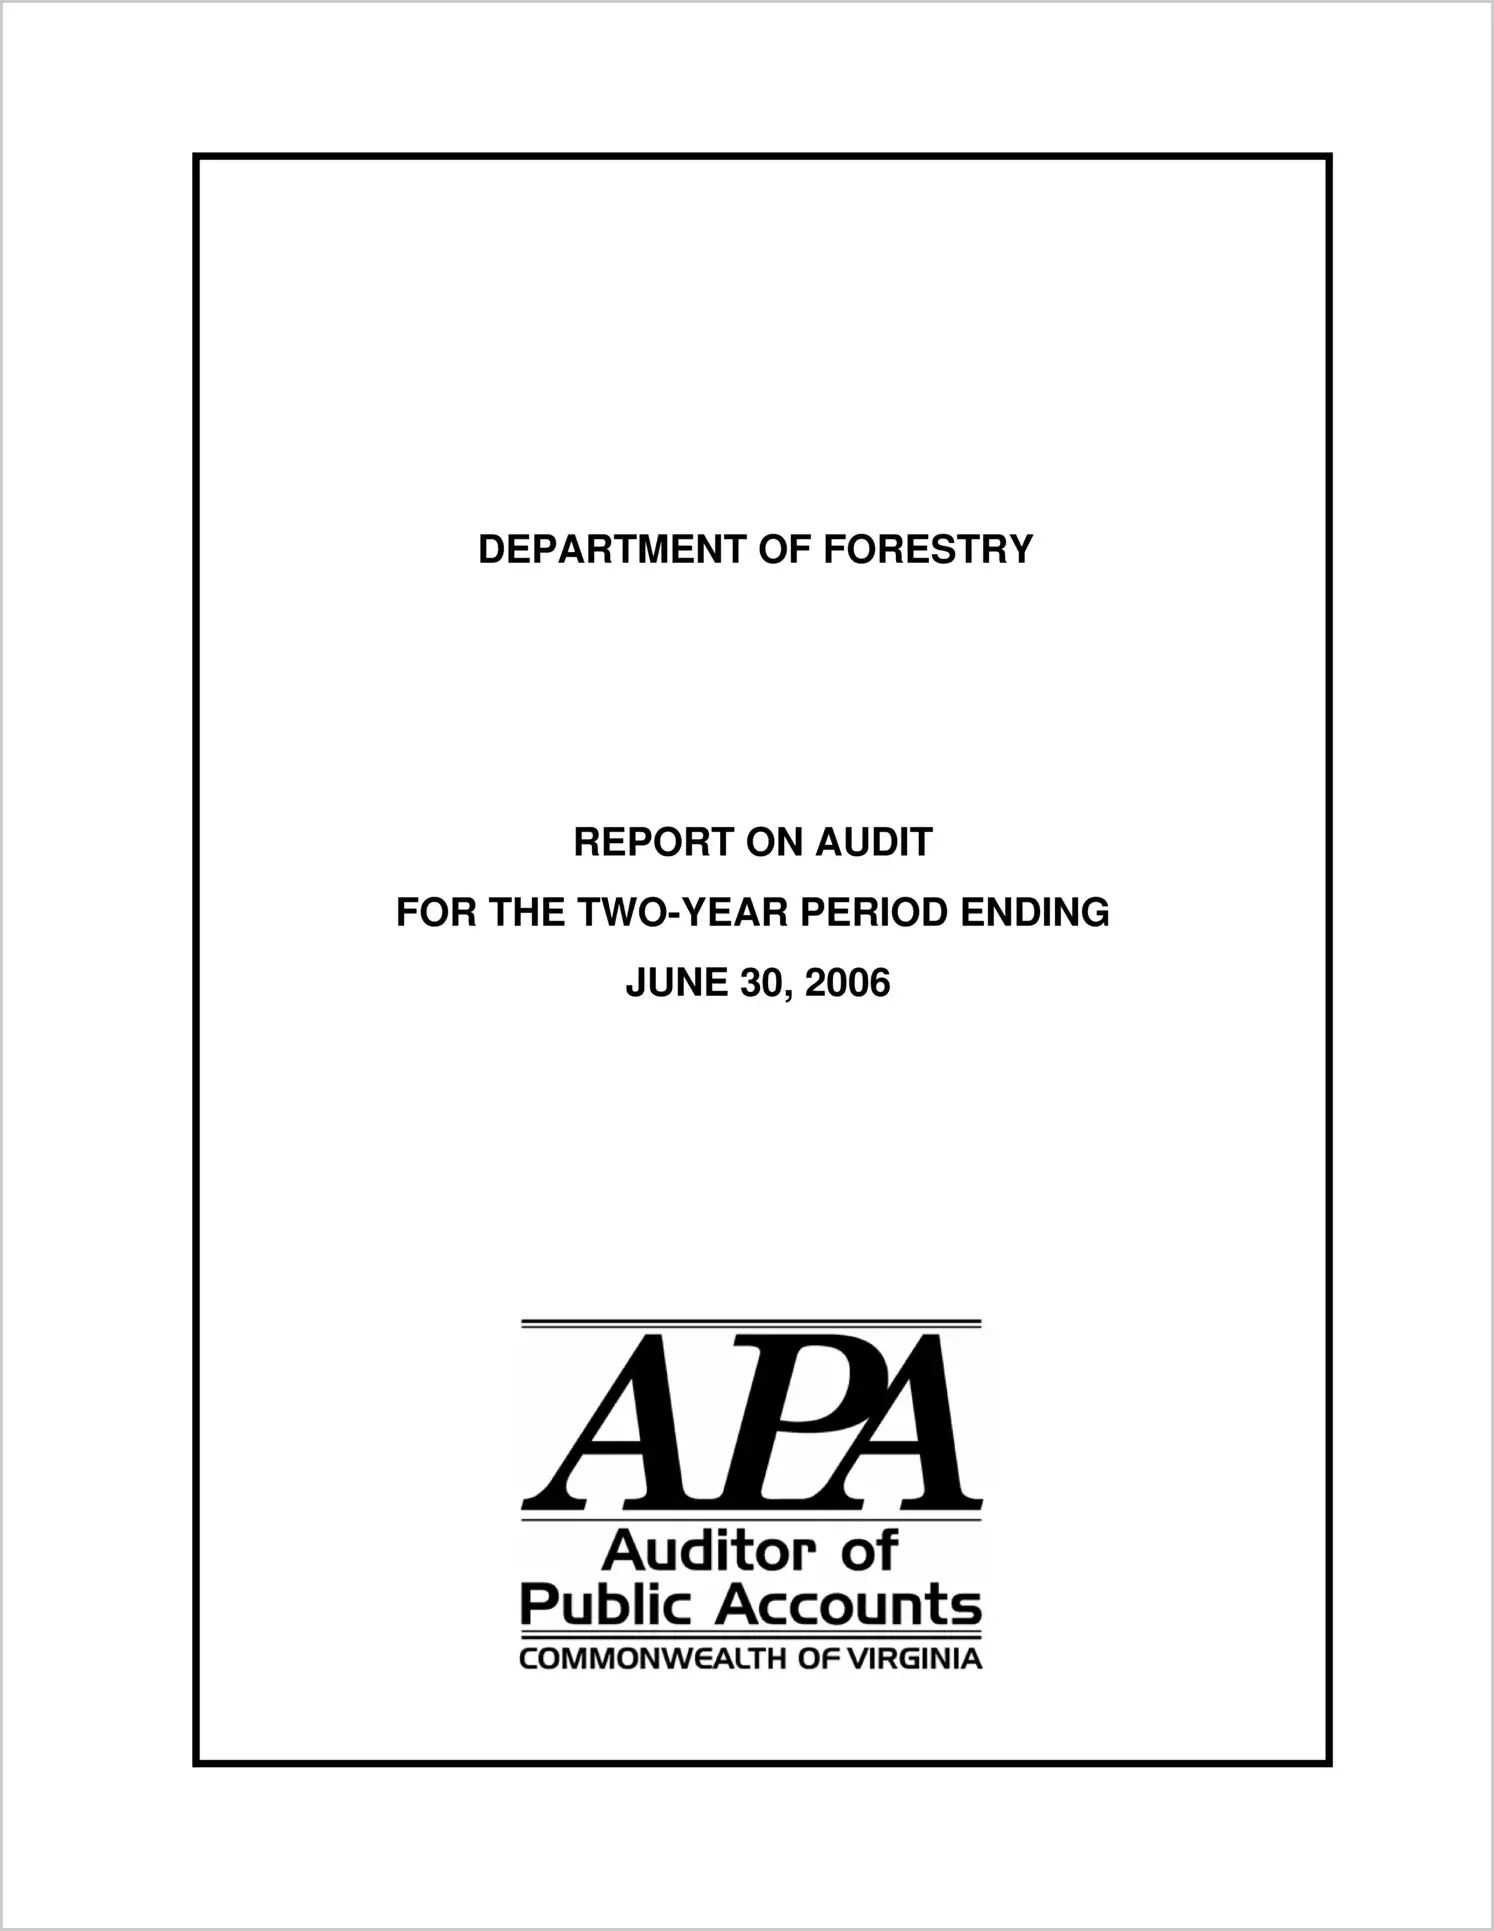 Department of Forestry for the two-year period ending June 30, 2006